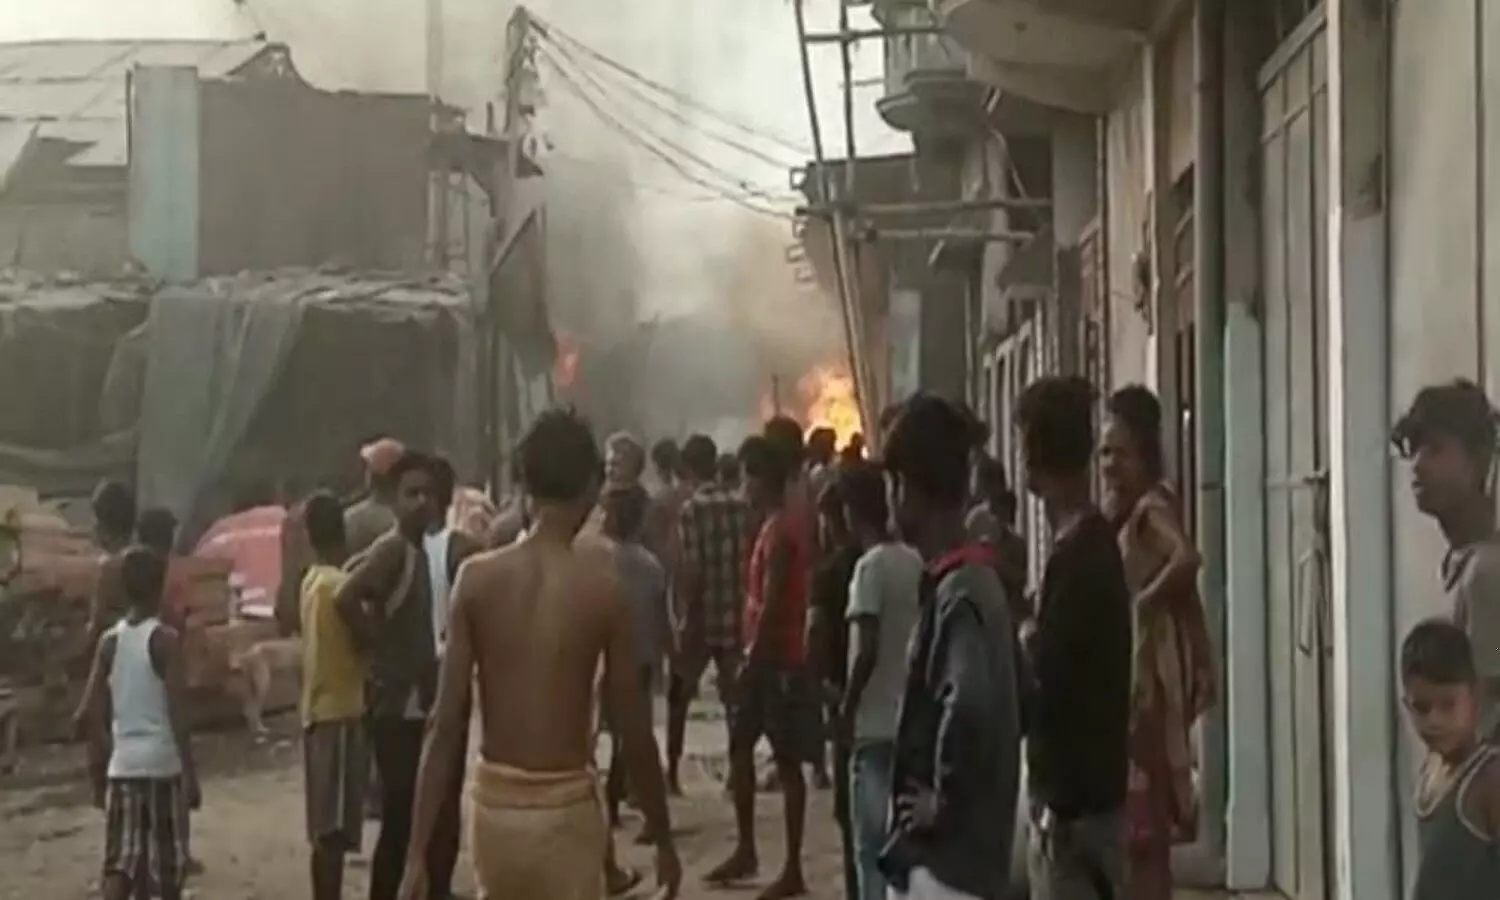 Aishbagh fire broke out